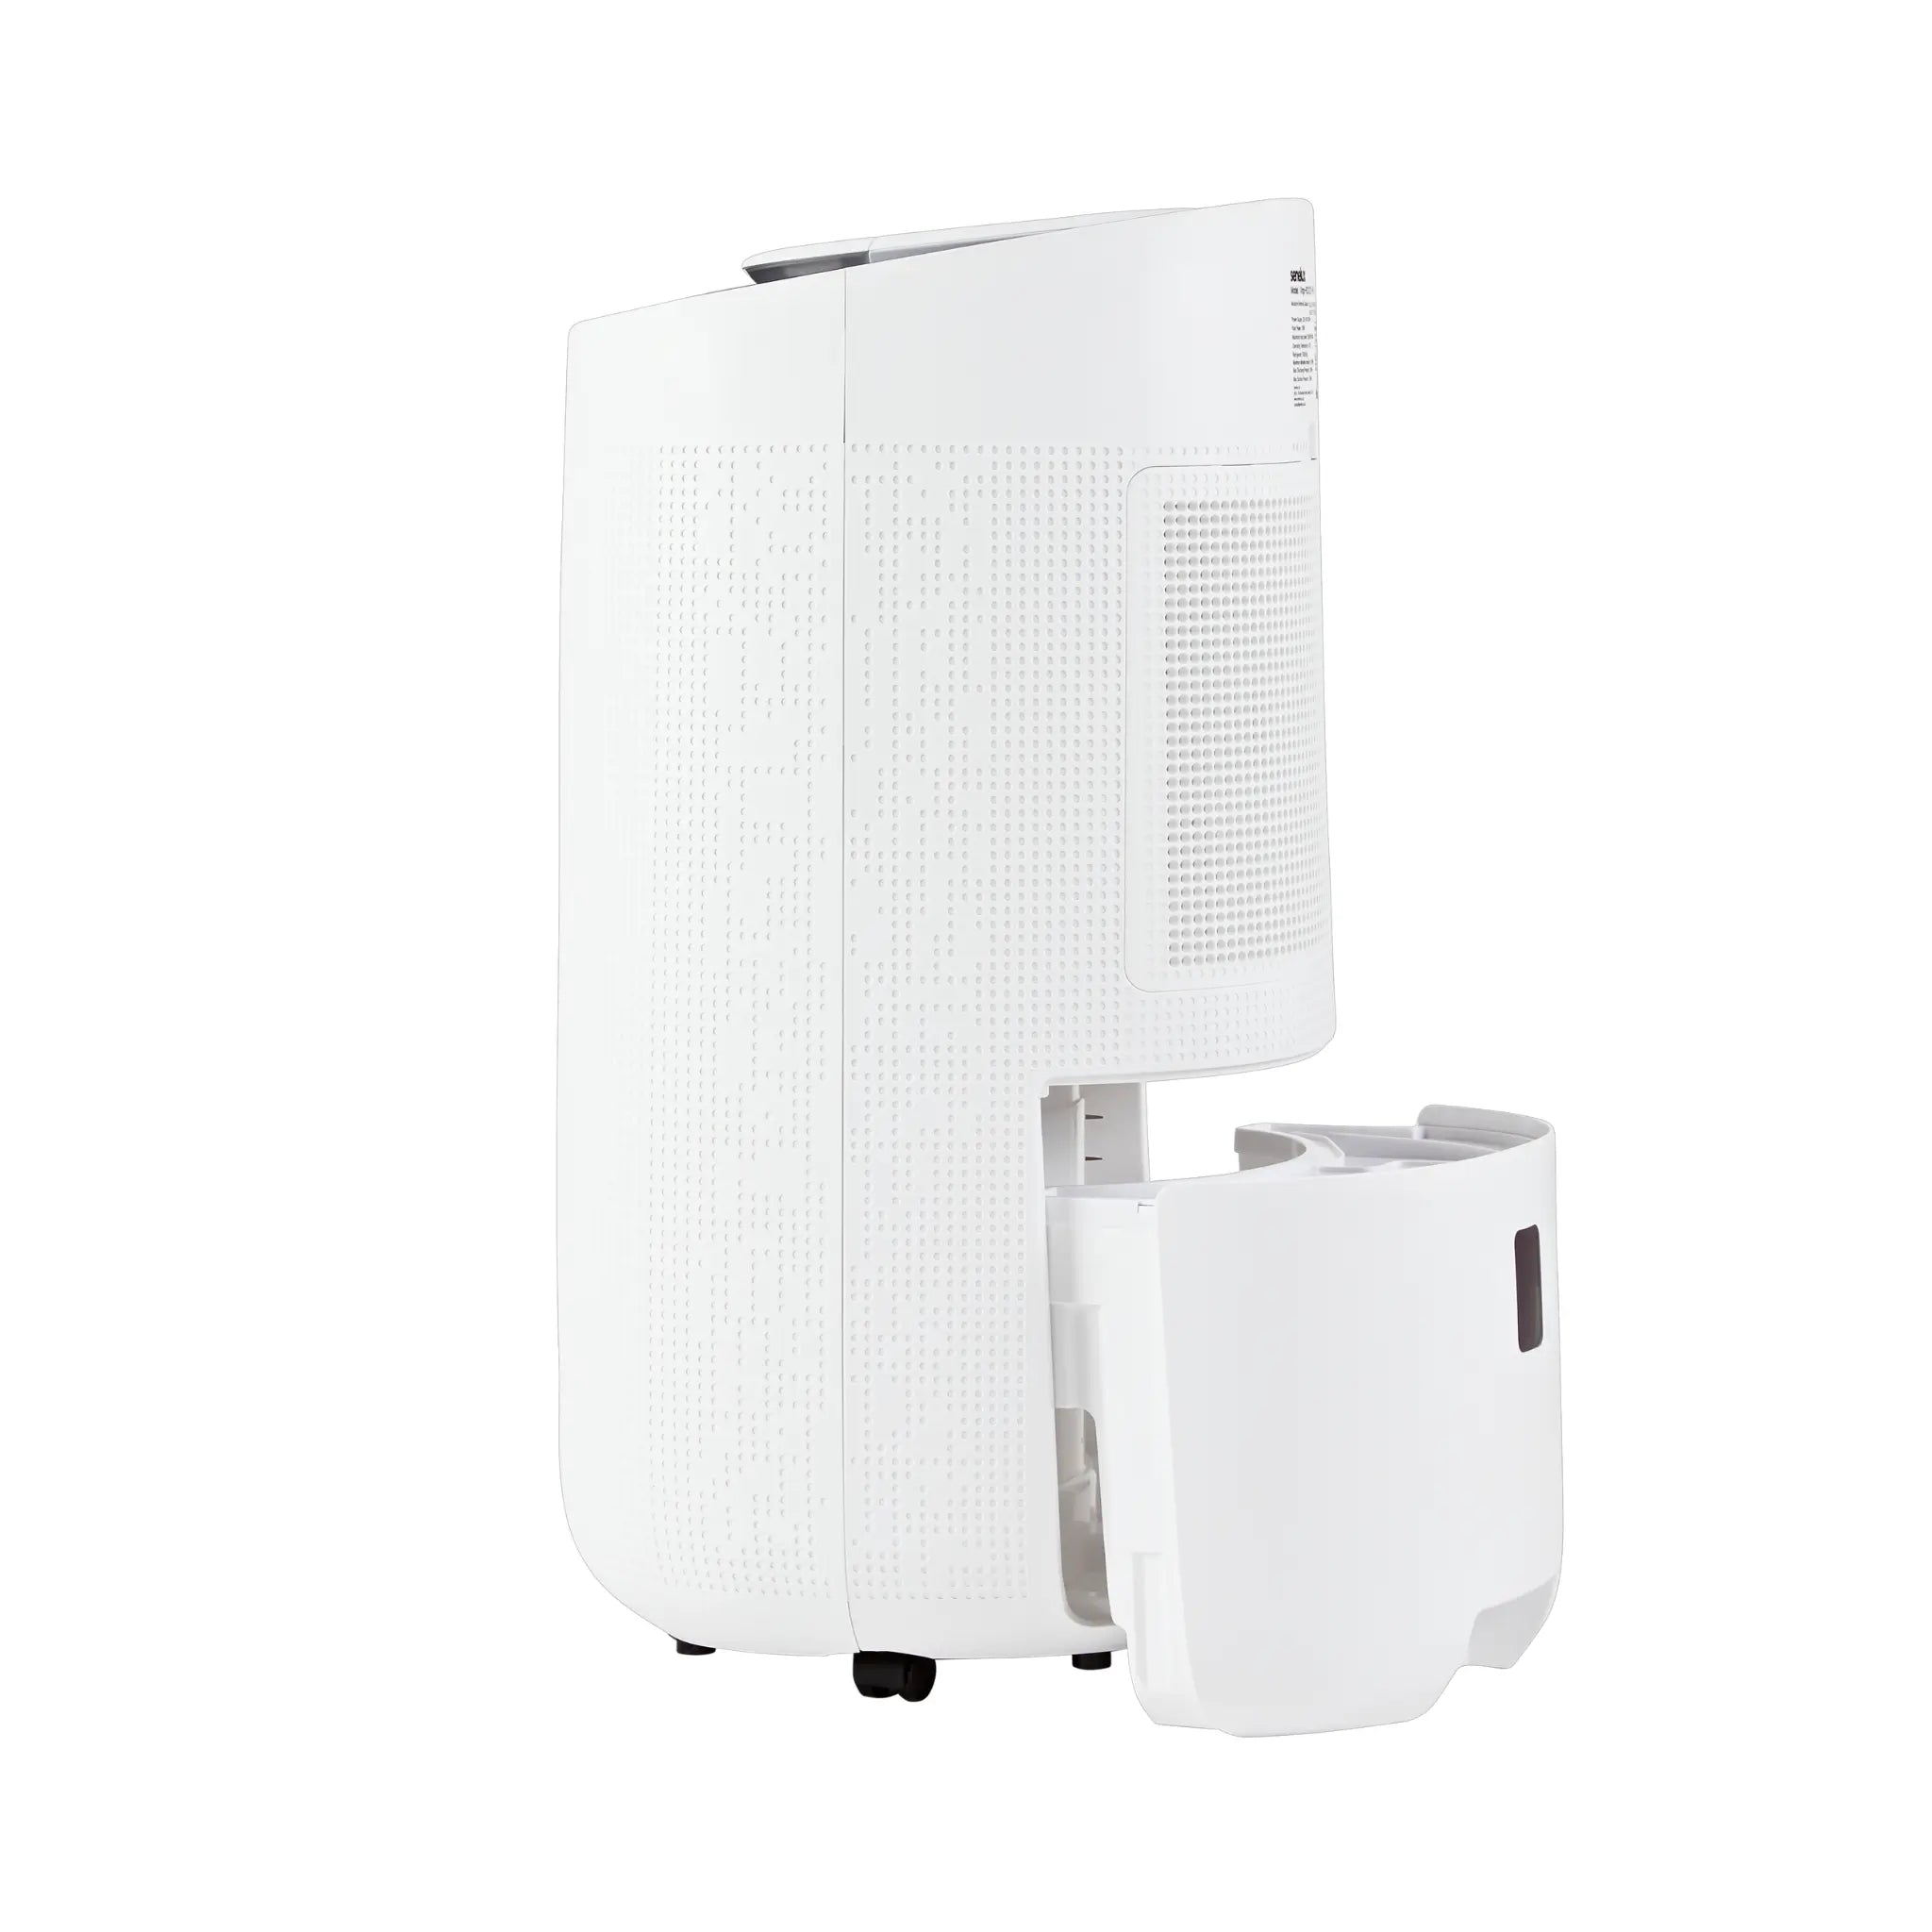 Large, 12l per day dehumidifier with the included easy-draw water tank being extracted from the back of the dehumidifier.